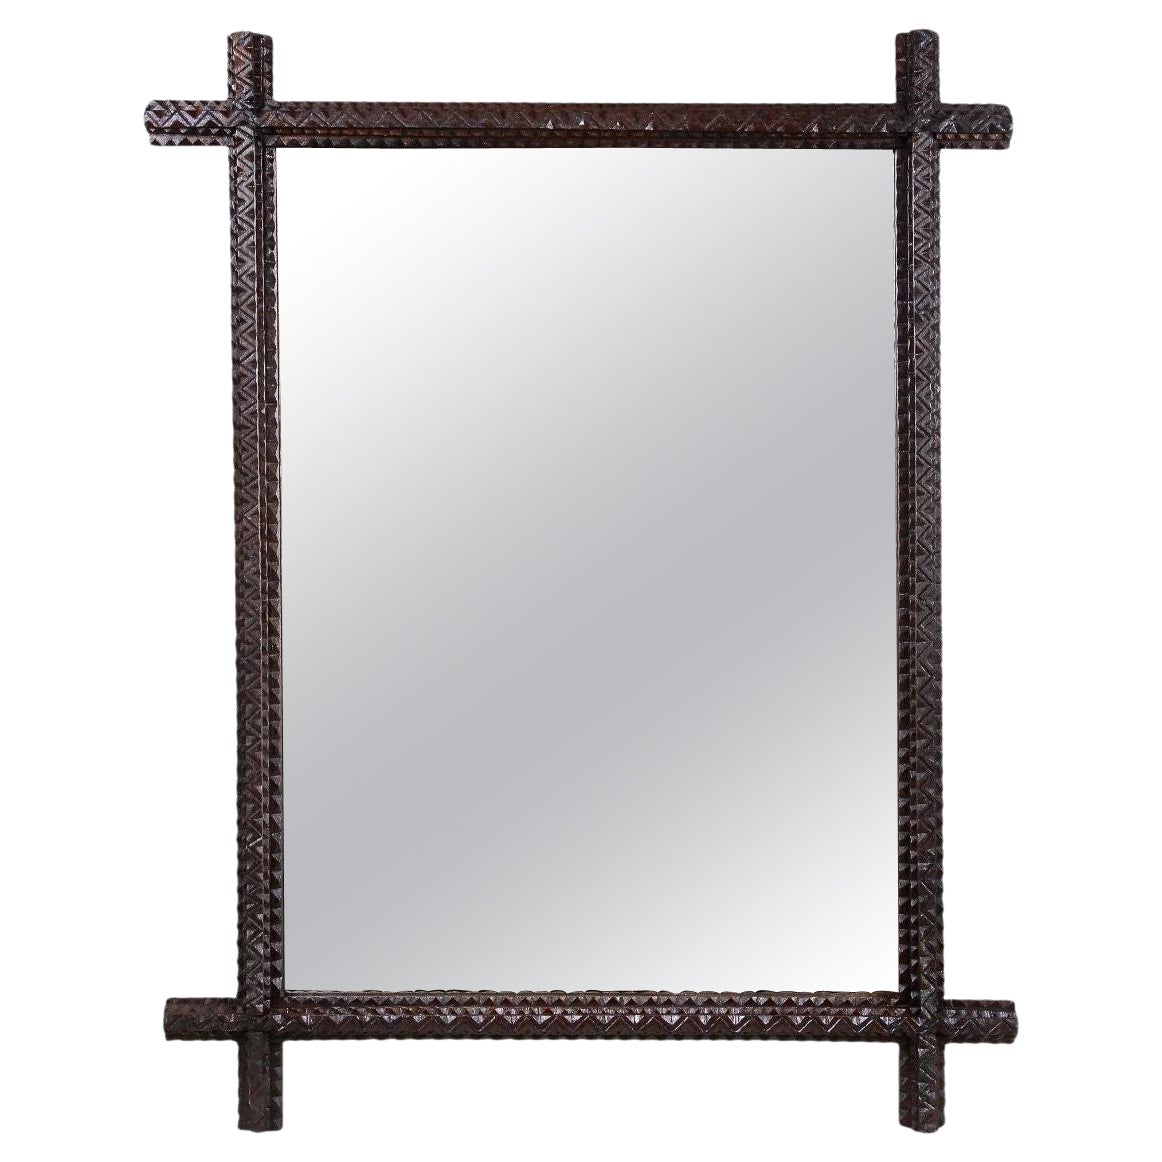 Rustic Tramp Art Wall Mirror with Extended Corners, Austria, circa 1870